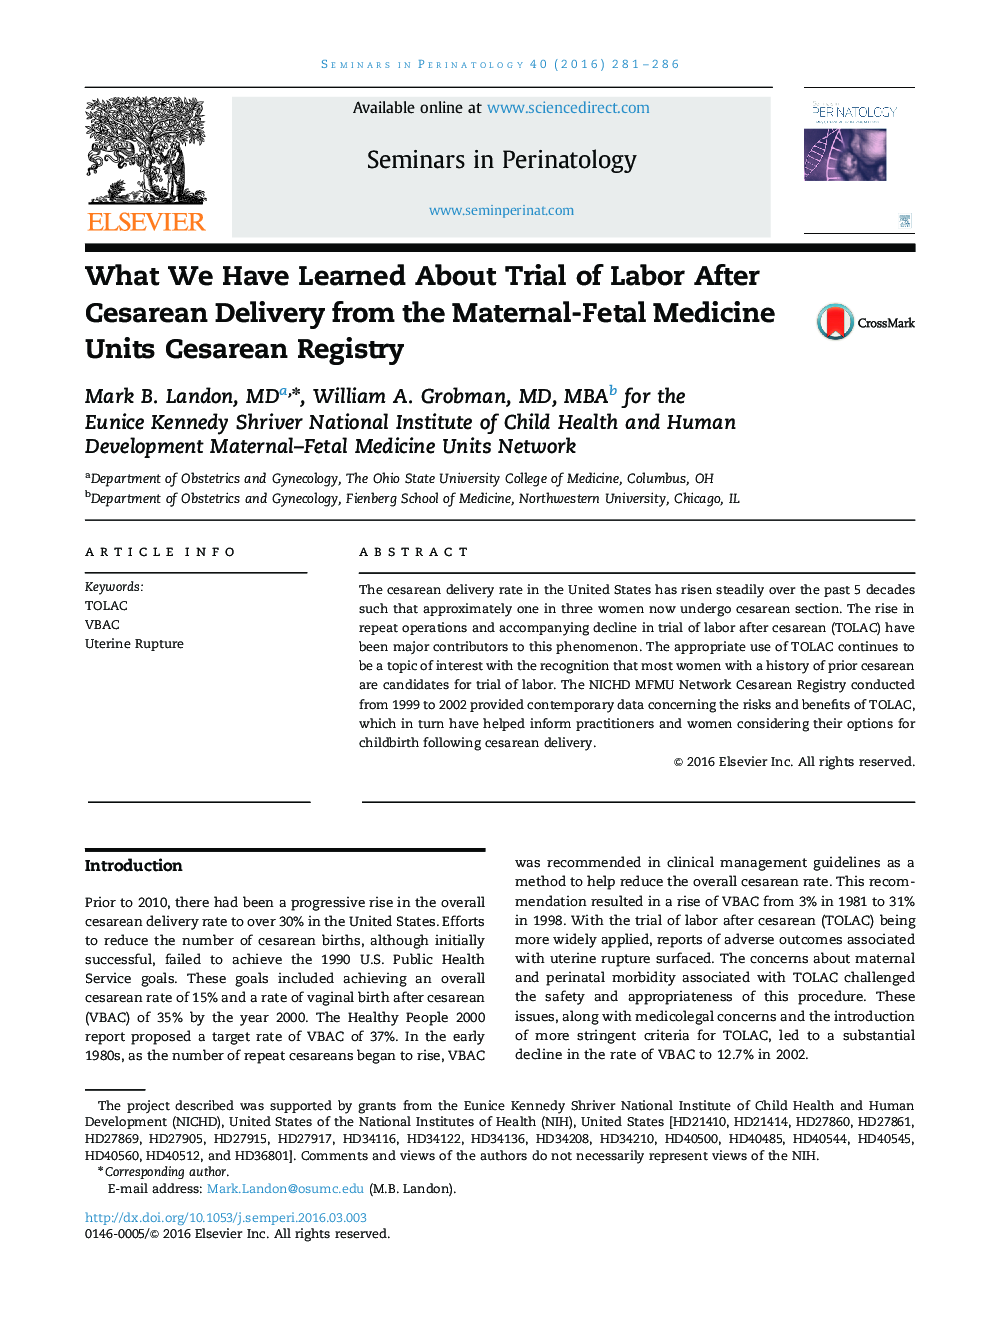 What We Have Learned About Trial of Labor After Cesarean Delivery from the Maternal-Fetal Medicine Units Cesarean Registry 